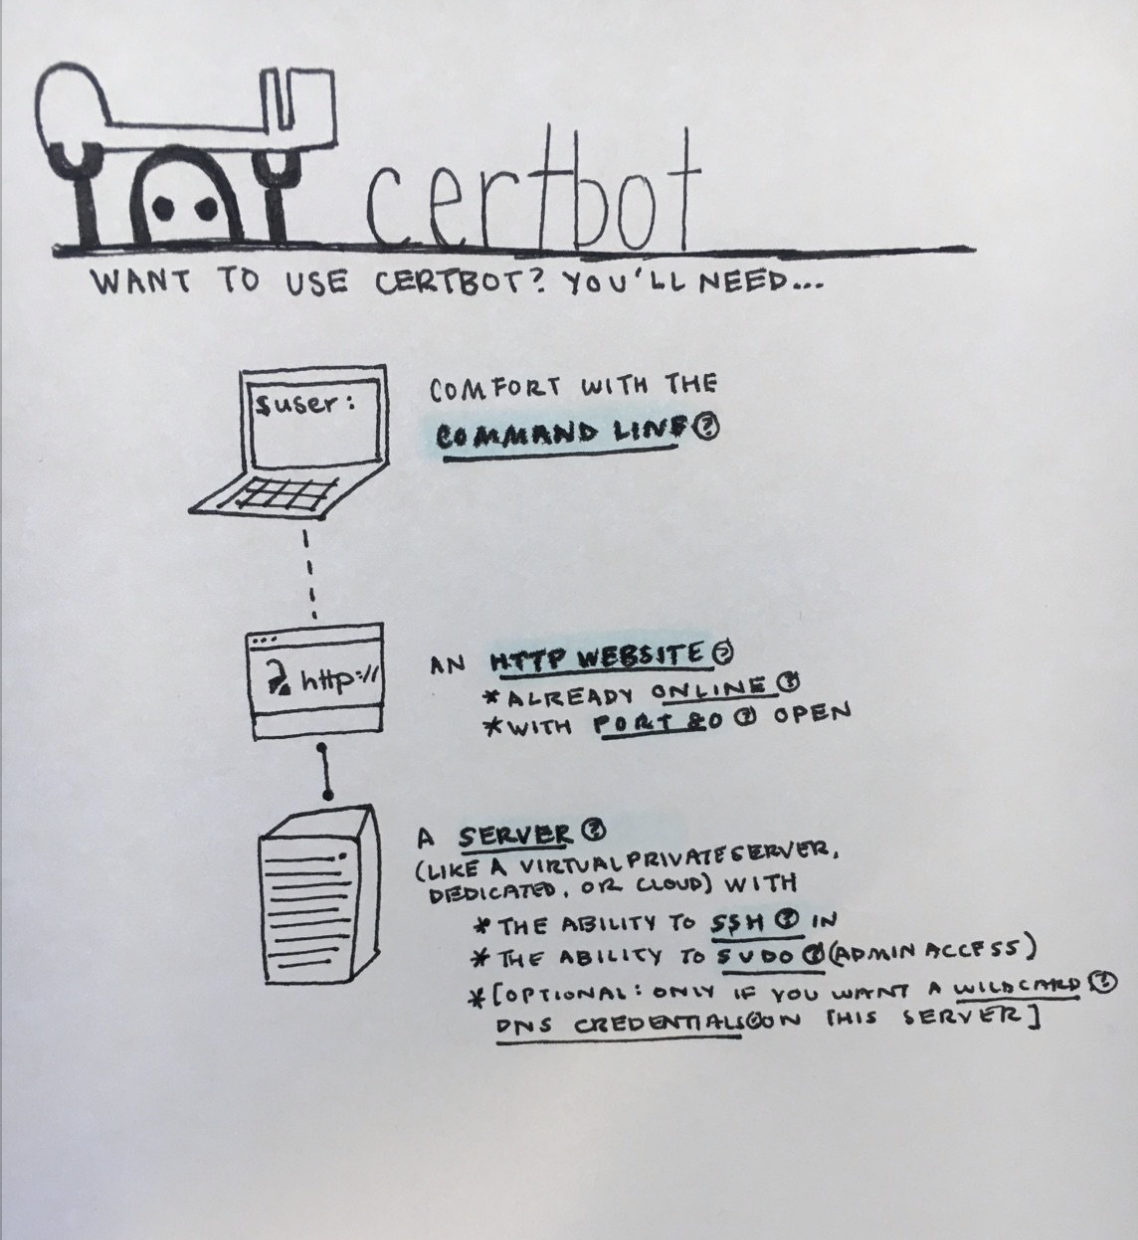 A doodle of our explainer for Certbot, which includes an illustration of a laptop beside the text "comfort with the command line," an illustration of a website beside the text "an HTTP website that's already online with port 80 open," and an illustration of a server.